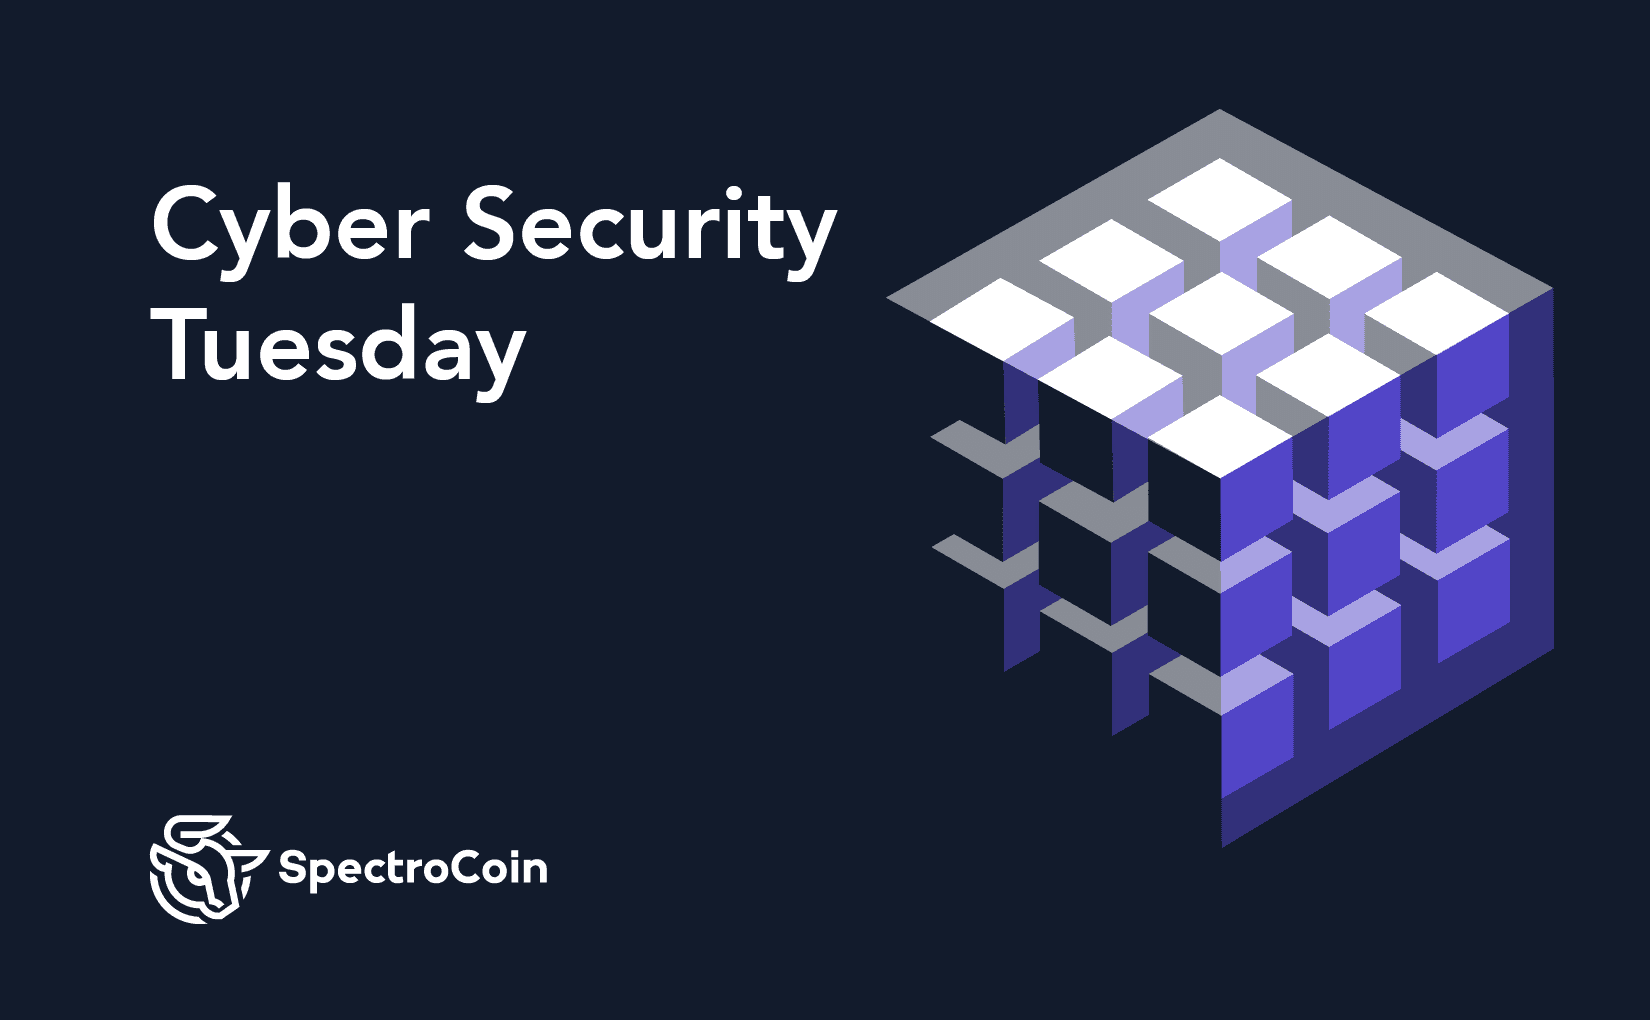 Cyber Security Tuesday